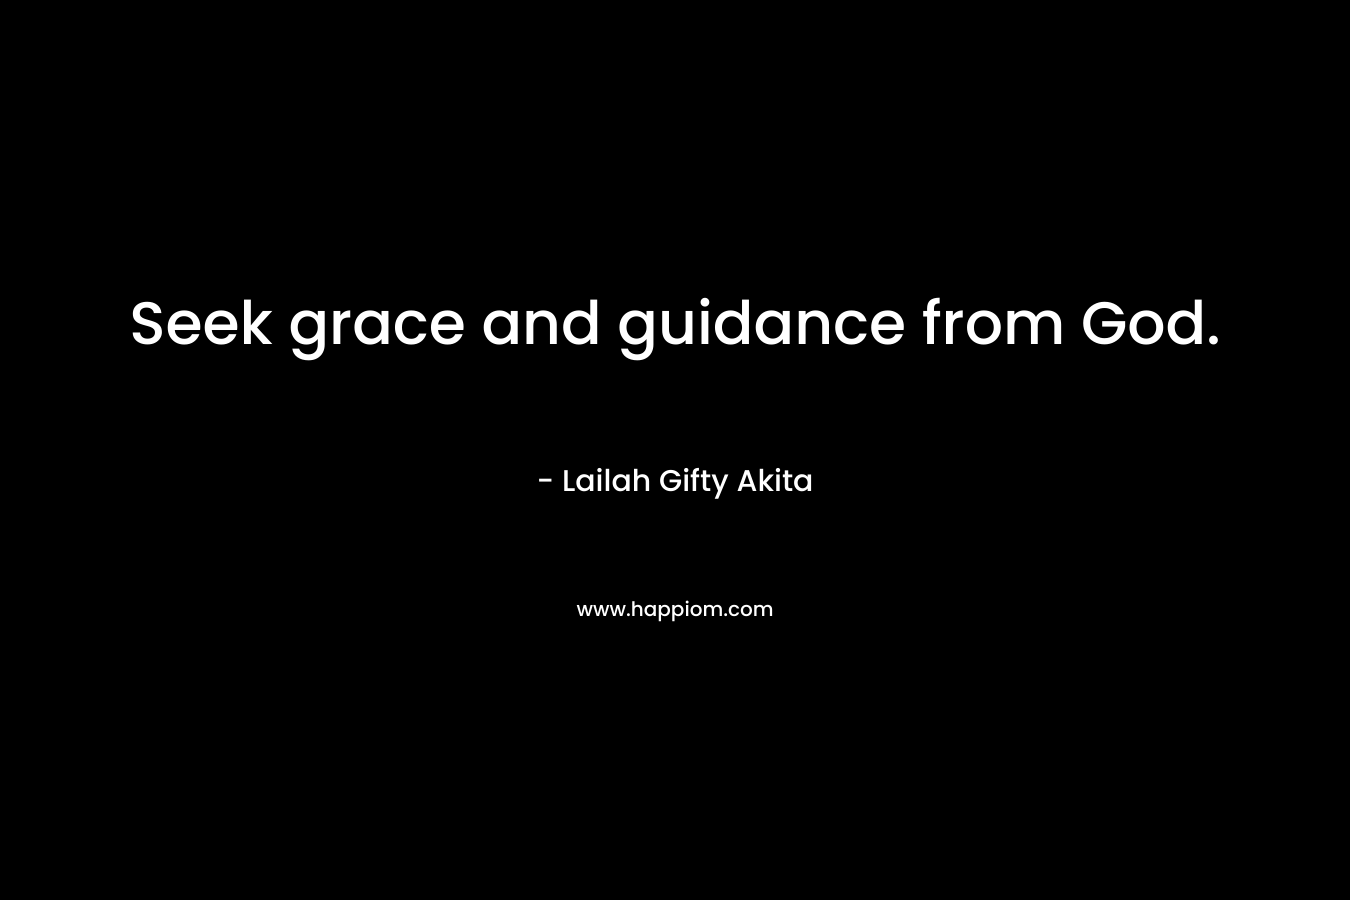 Seek grace and guidance from God.